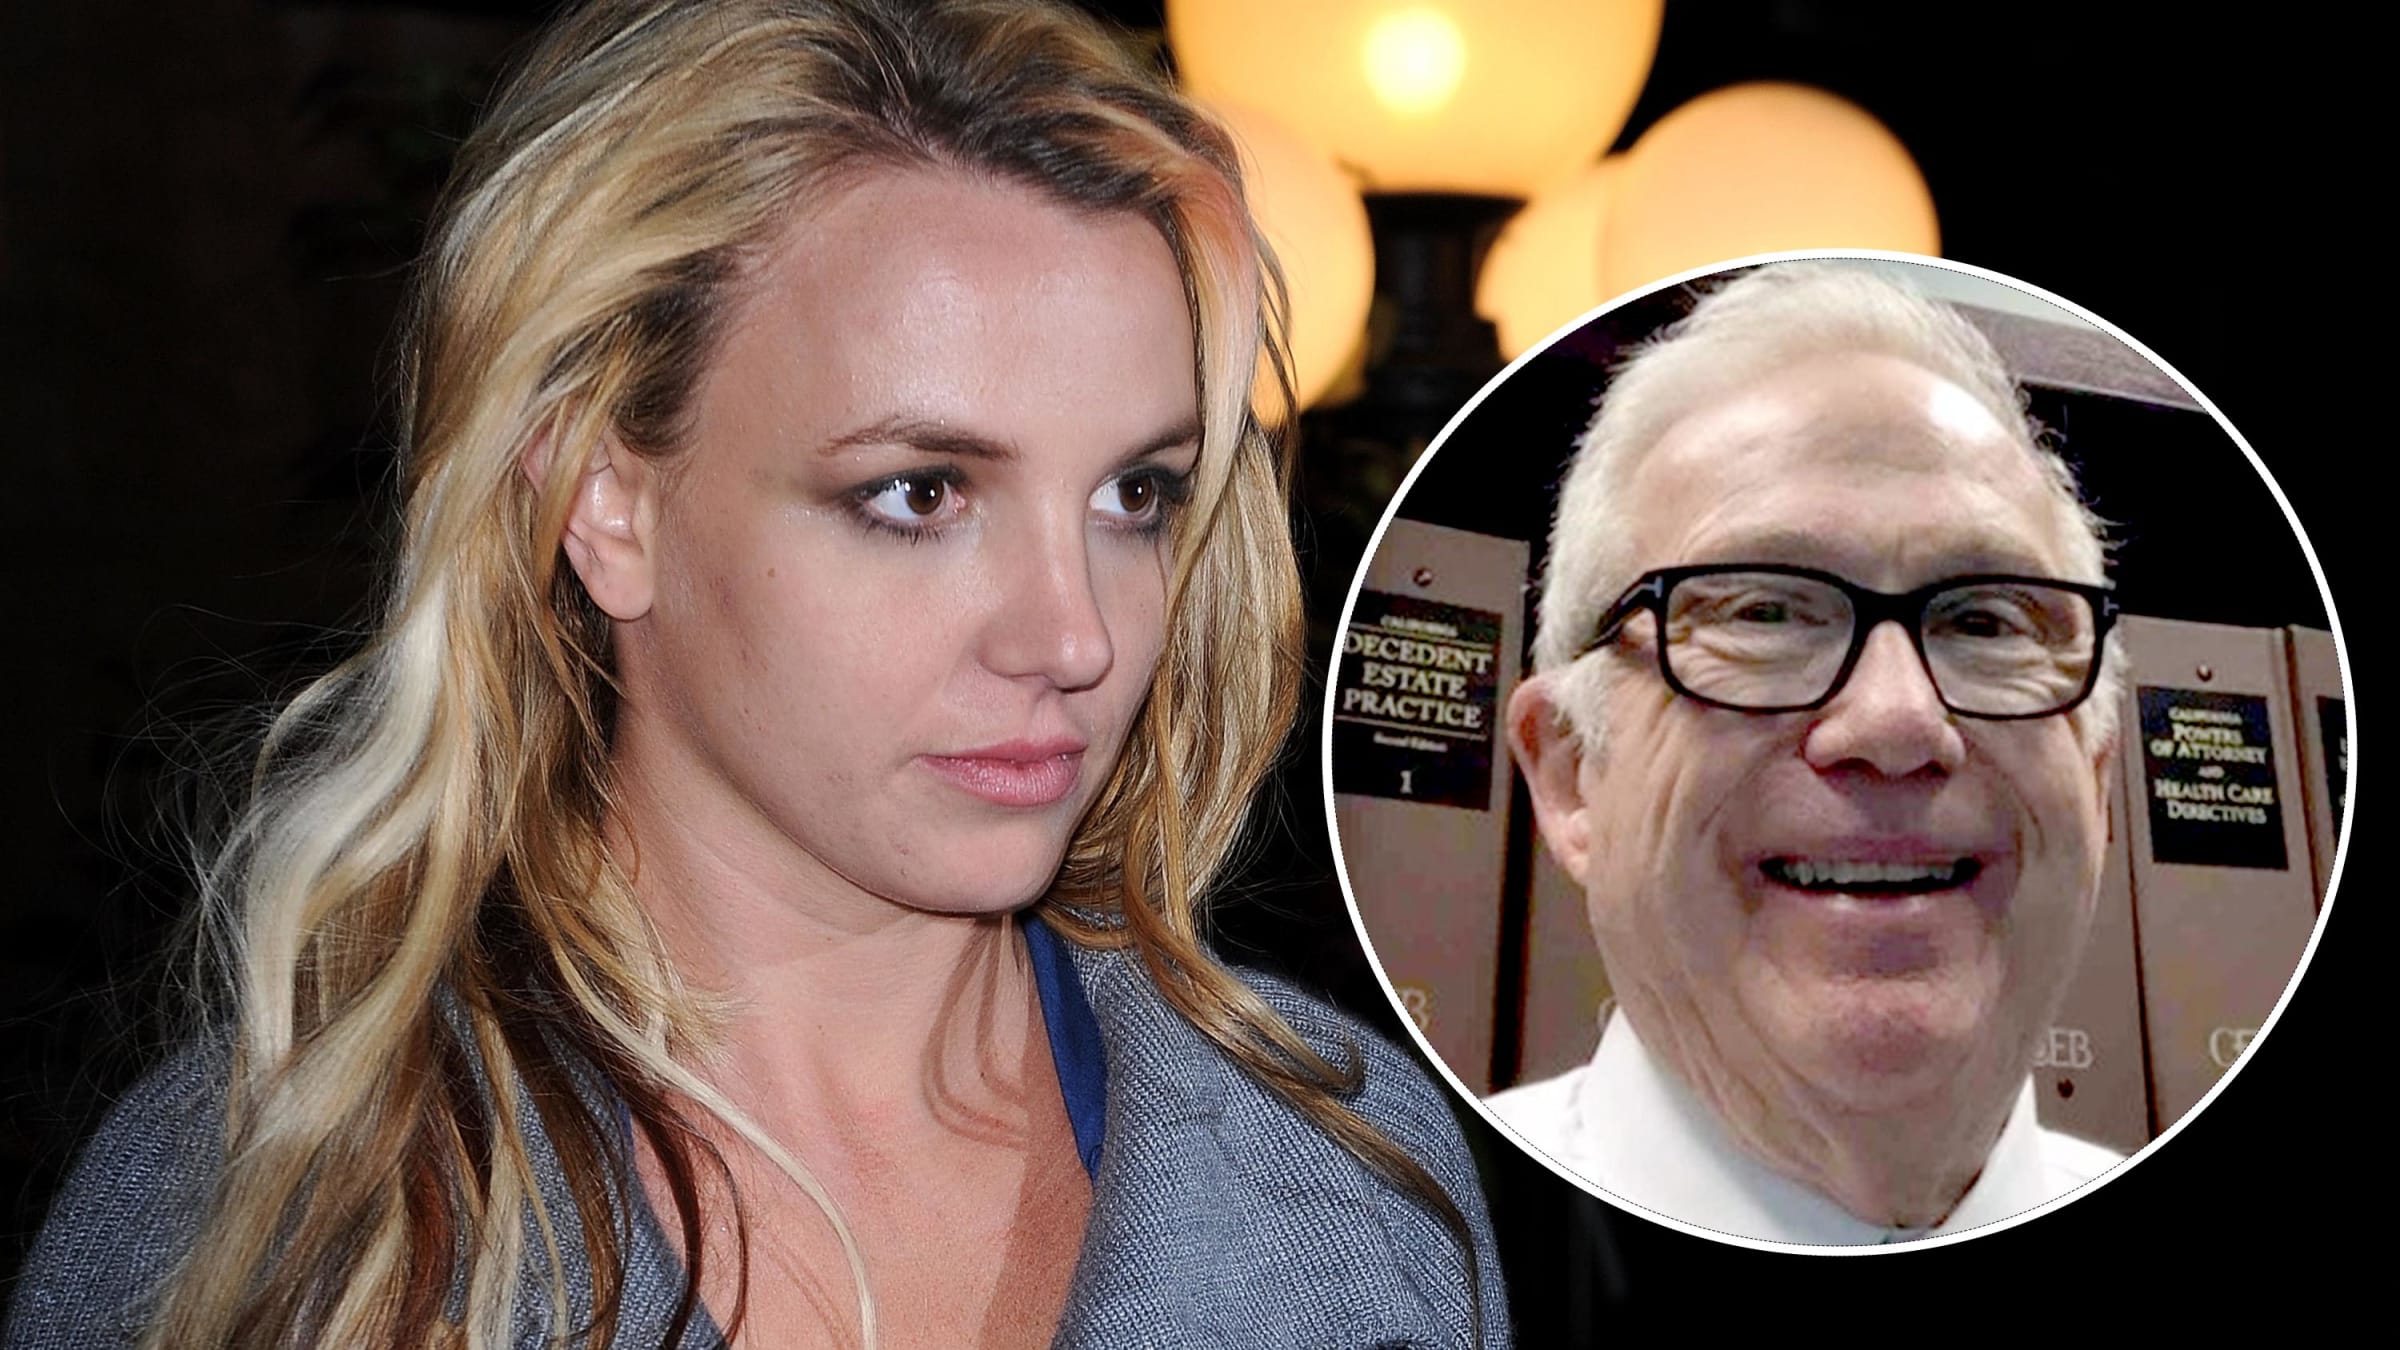 Britney Spears Conservatorship Lawyer Samuel Ingham Has a Very Mysterious Past image